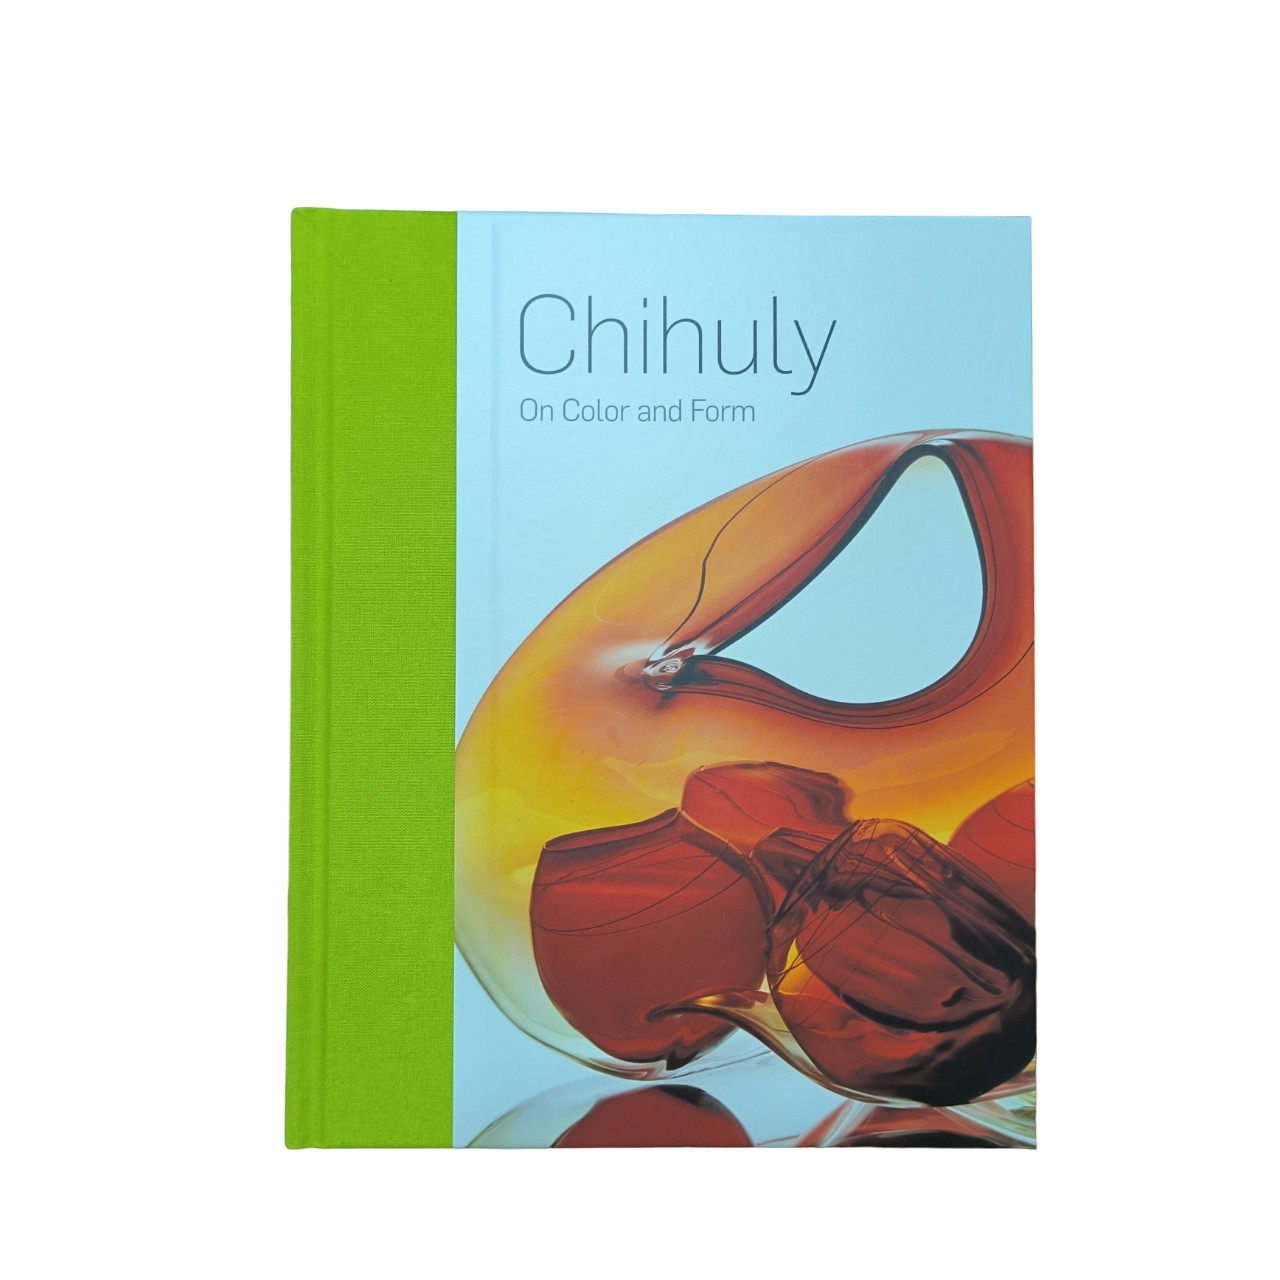 China Chihuly on Color and Form | Cloth & Paper Cover Material Art Book Smyth Sewn Binding factory